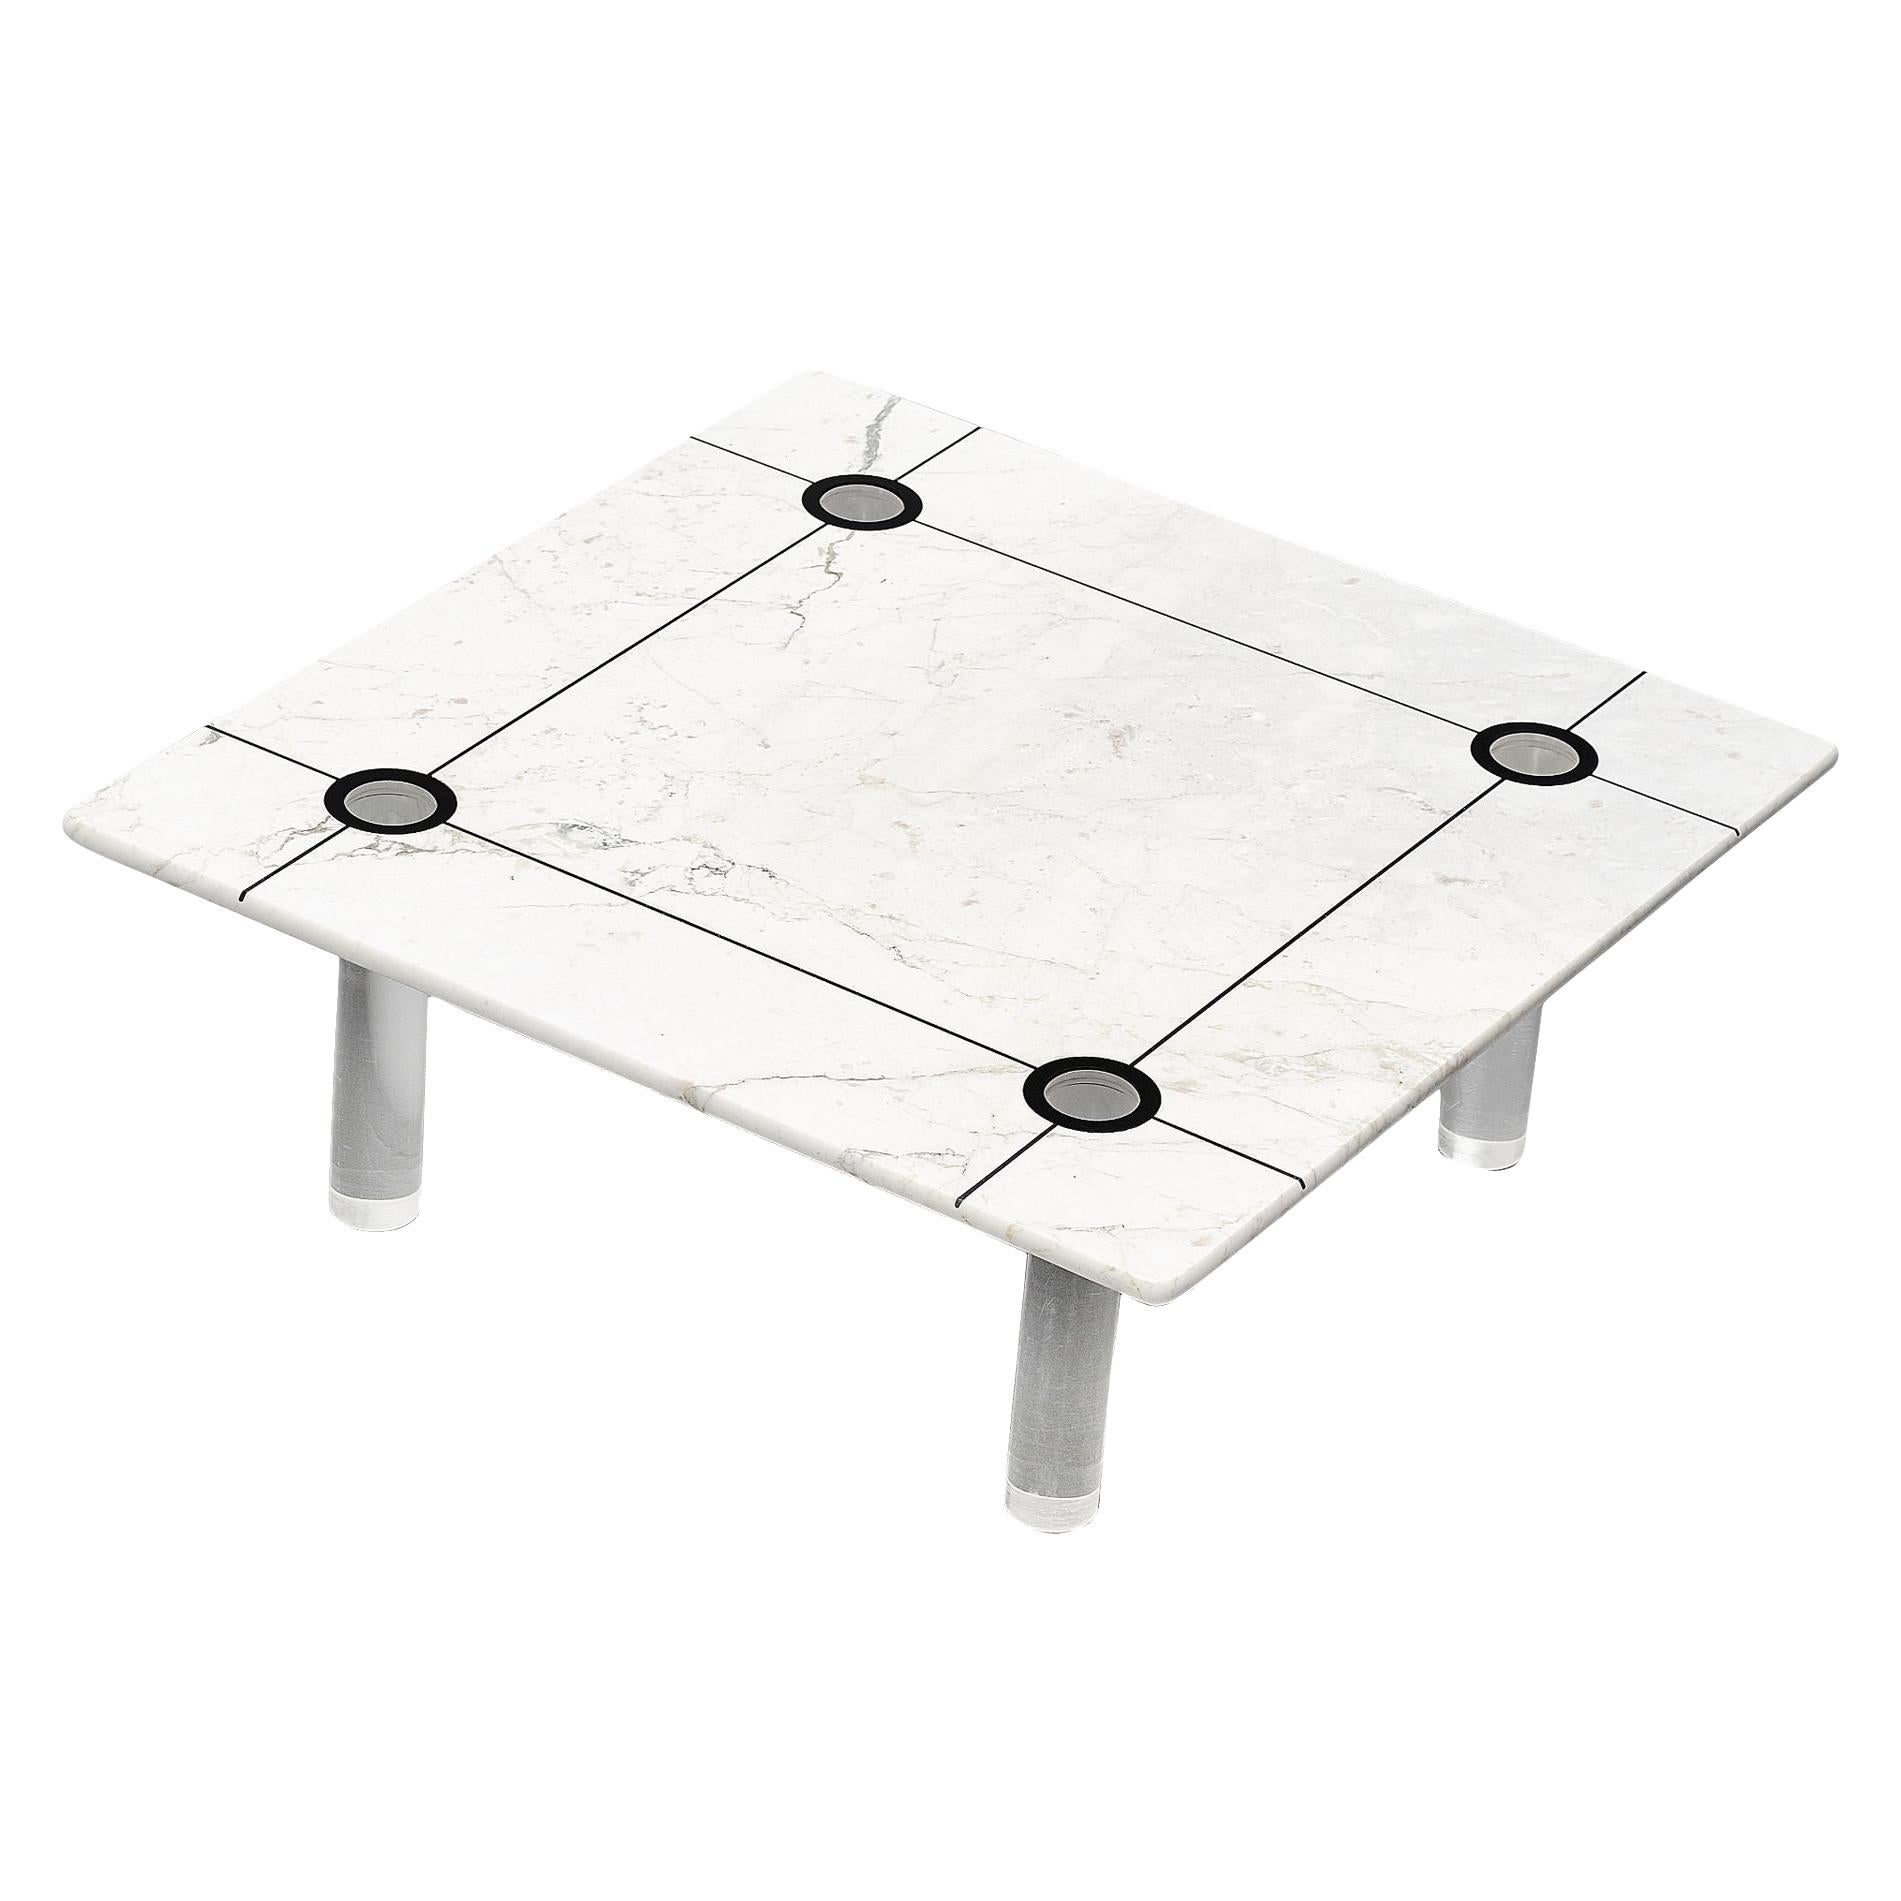 Romeo Rega Attributed Coffee Table Marble and Perspex, Italy, 1970 For Sale